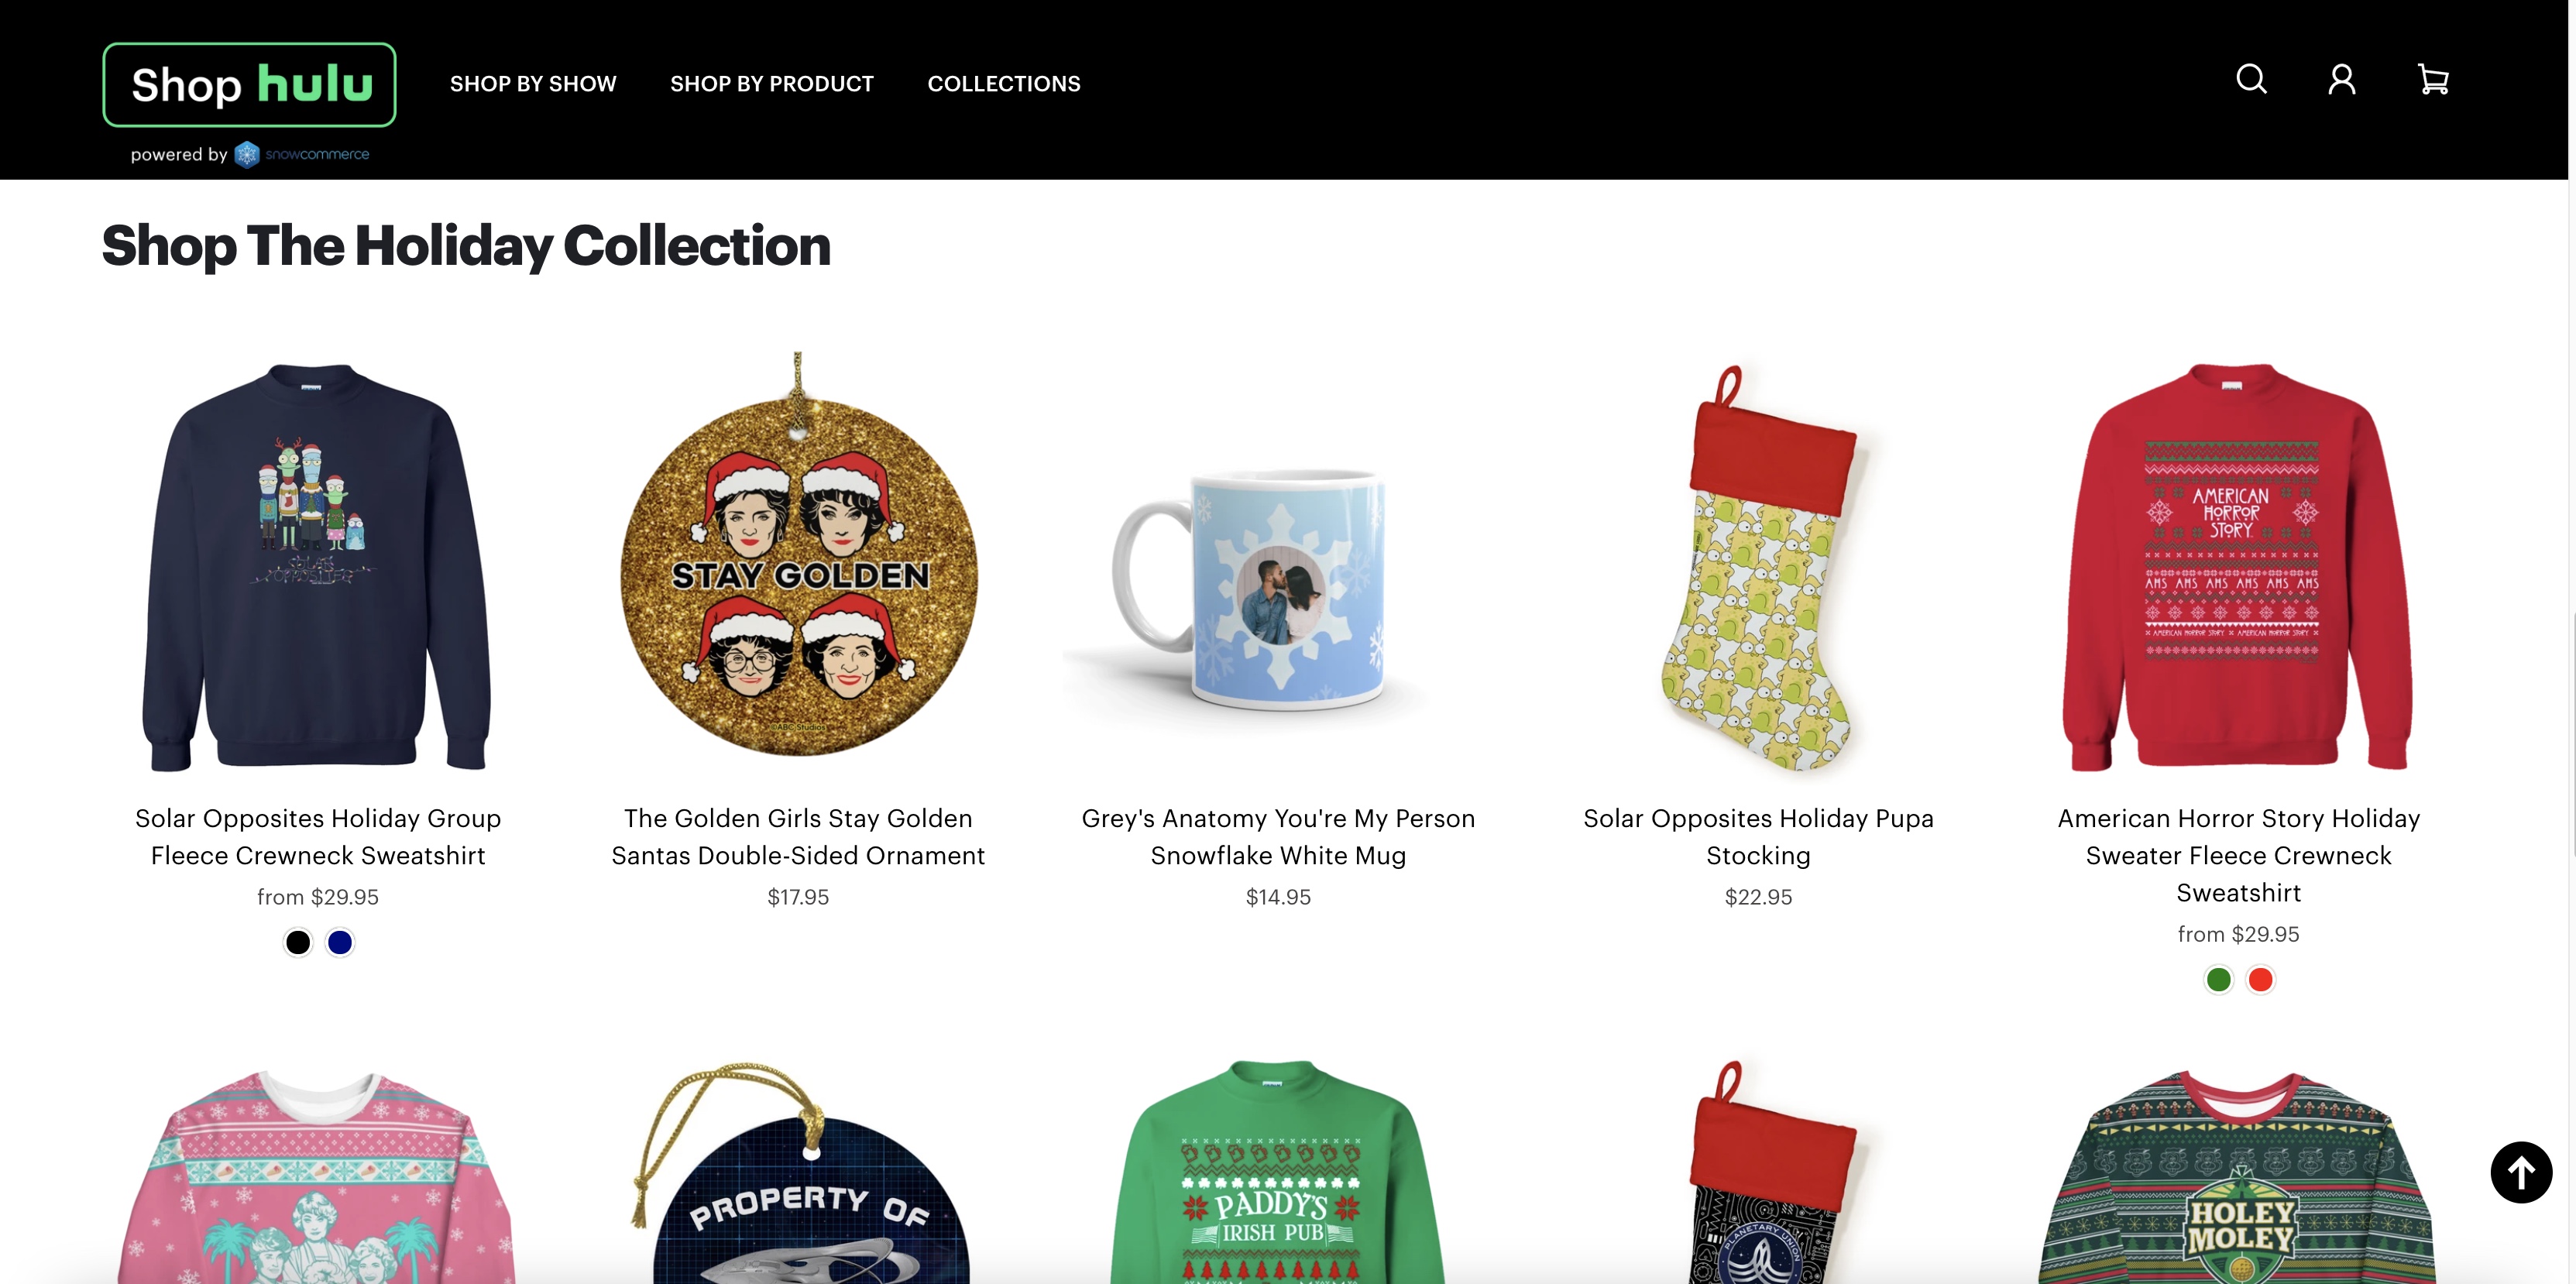 Hulu launches its own online shop, with ugly holiday sweaters and other merch